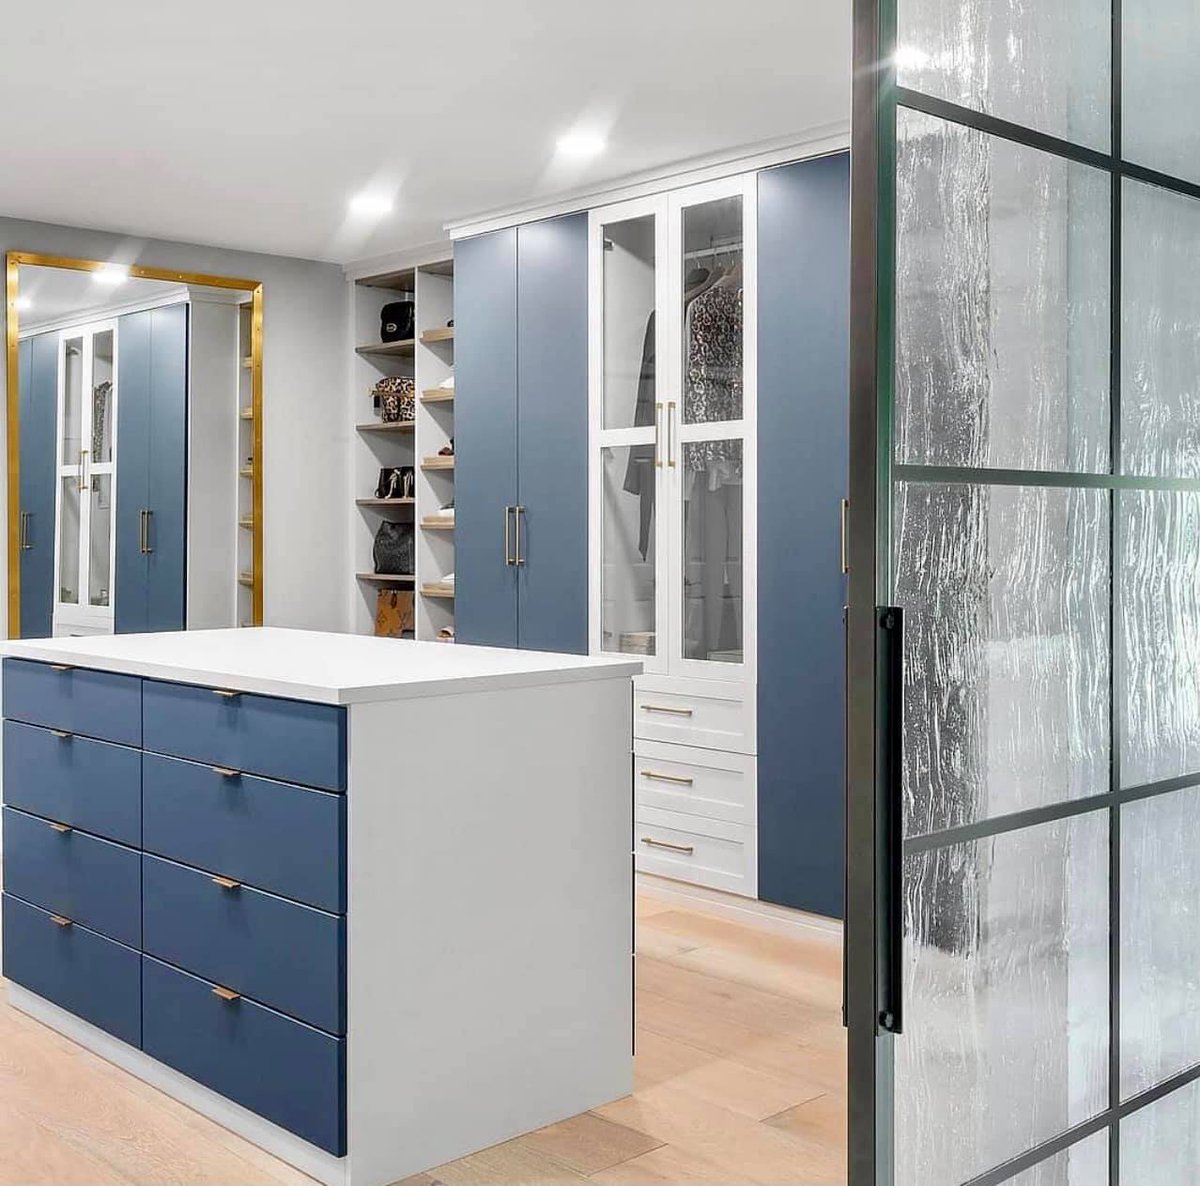 Start and end your day with a functional space! Give us a call at 913-888-1199 to schedule your complimentary design consultation. #organizedhome